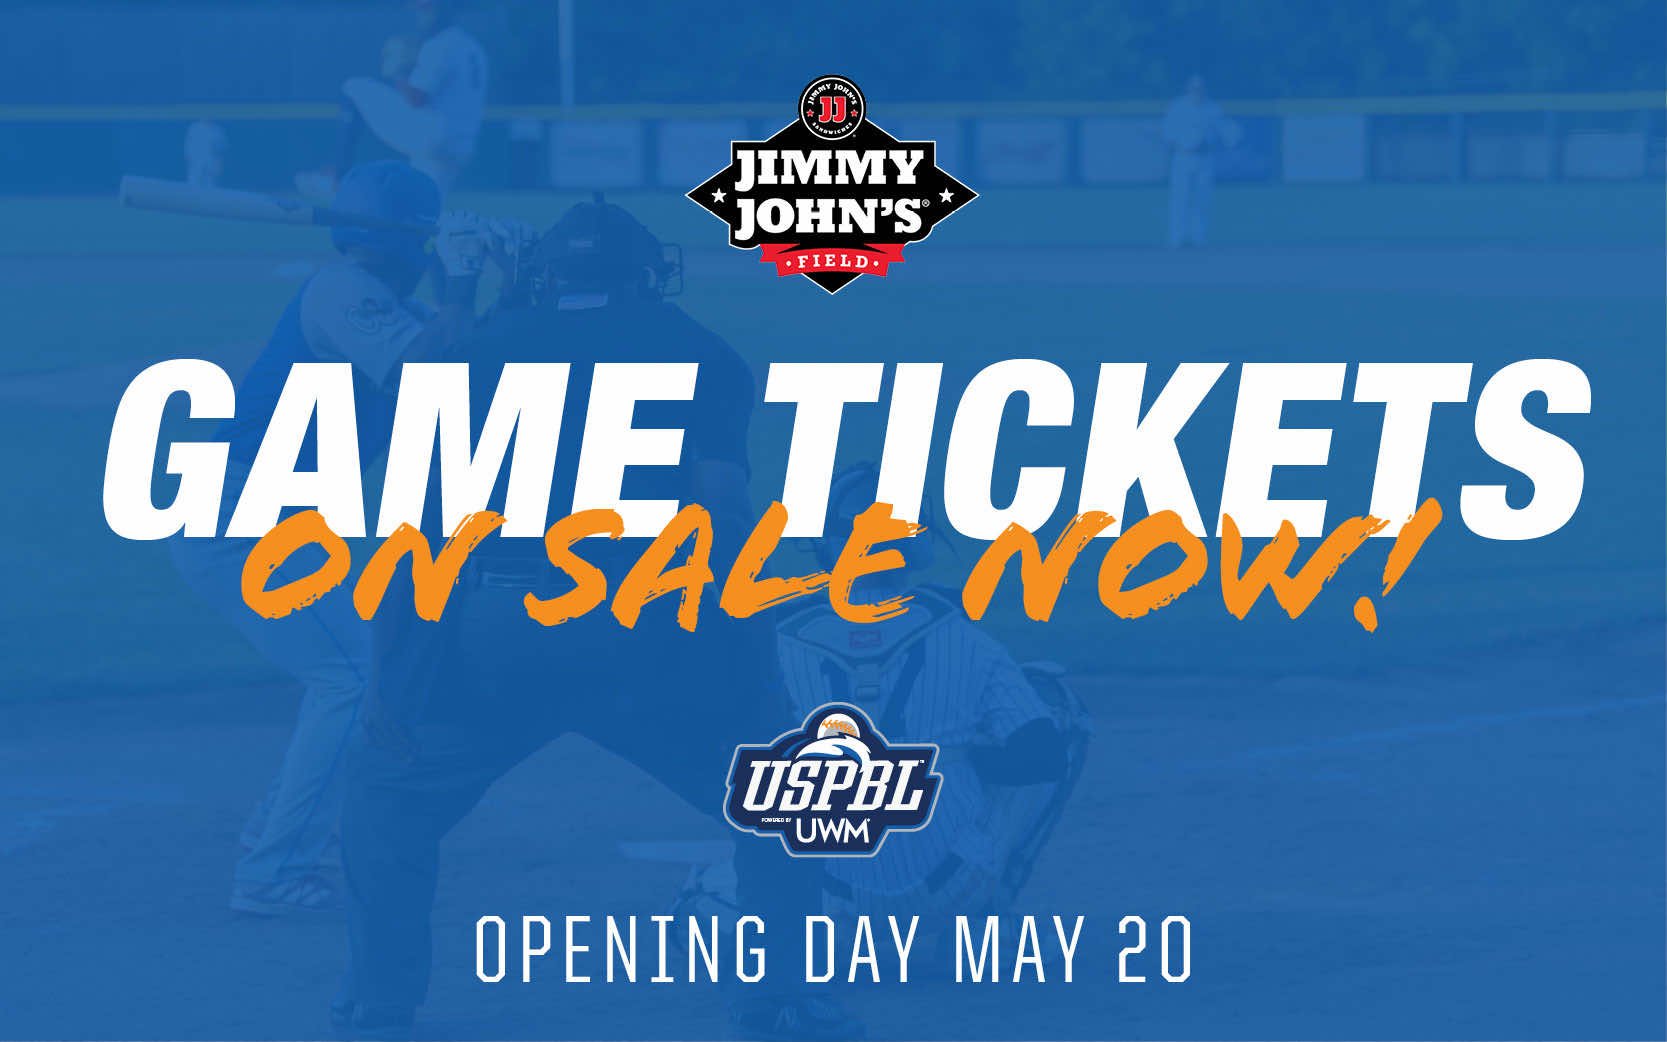 USPBL Opening Day May 20 - Game Tickets On Sale Now